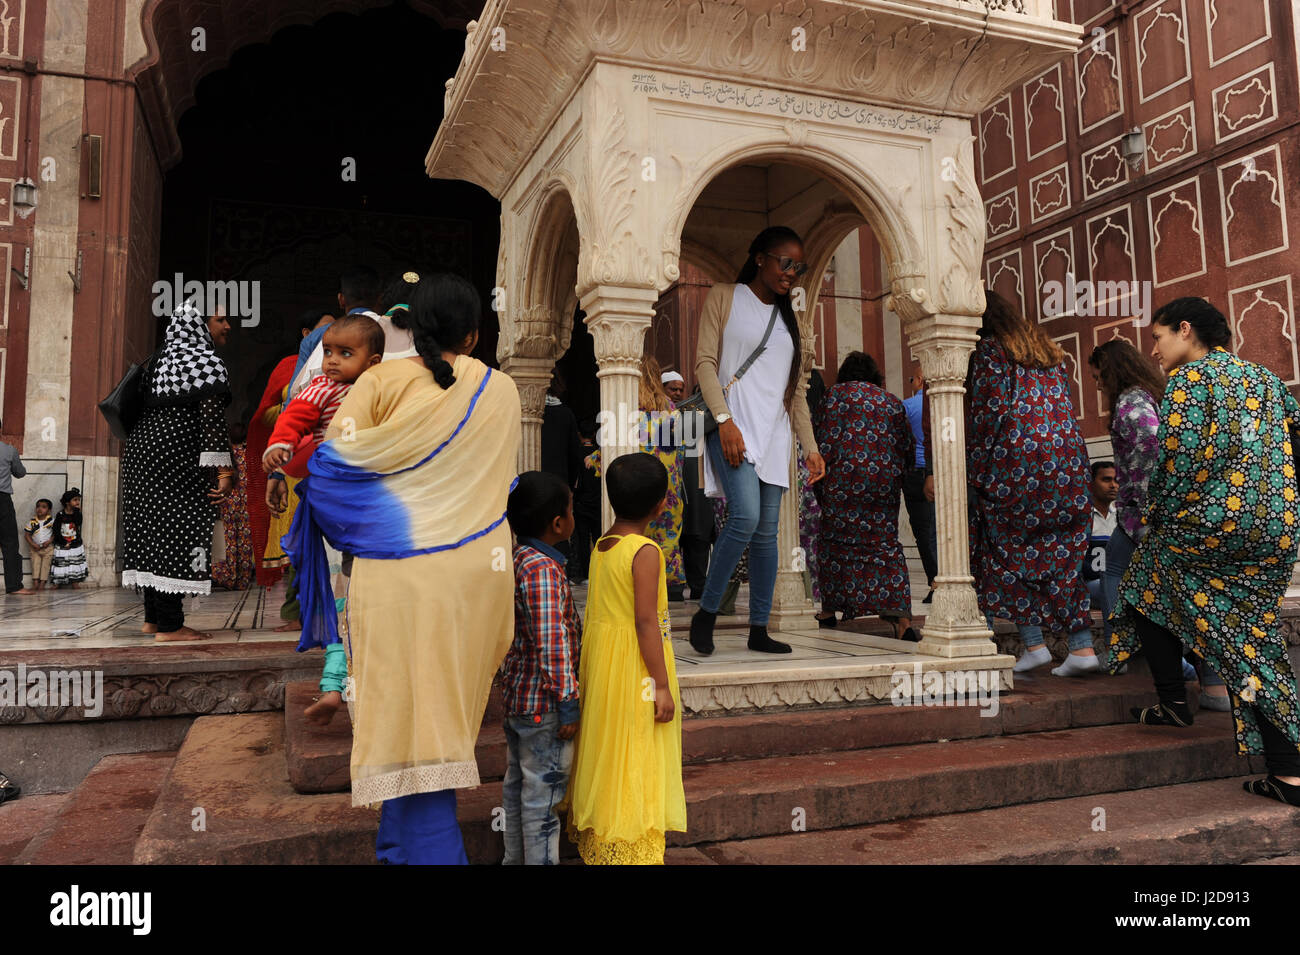 Tourists pose for photographs at the Jama Masjid Mosque of Delhi, India Stock Photo